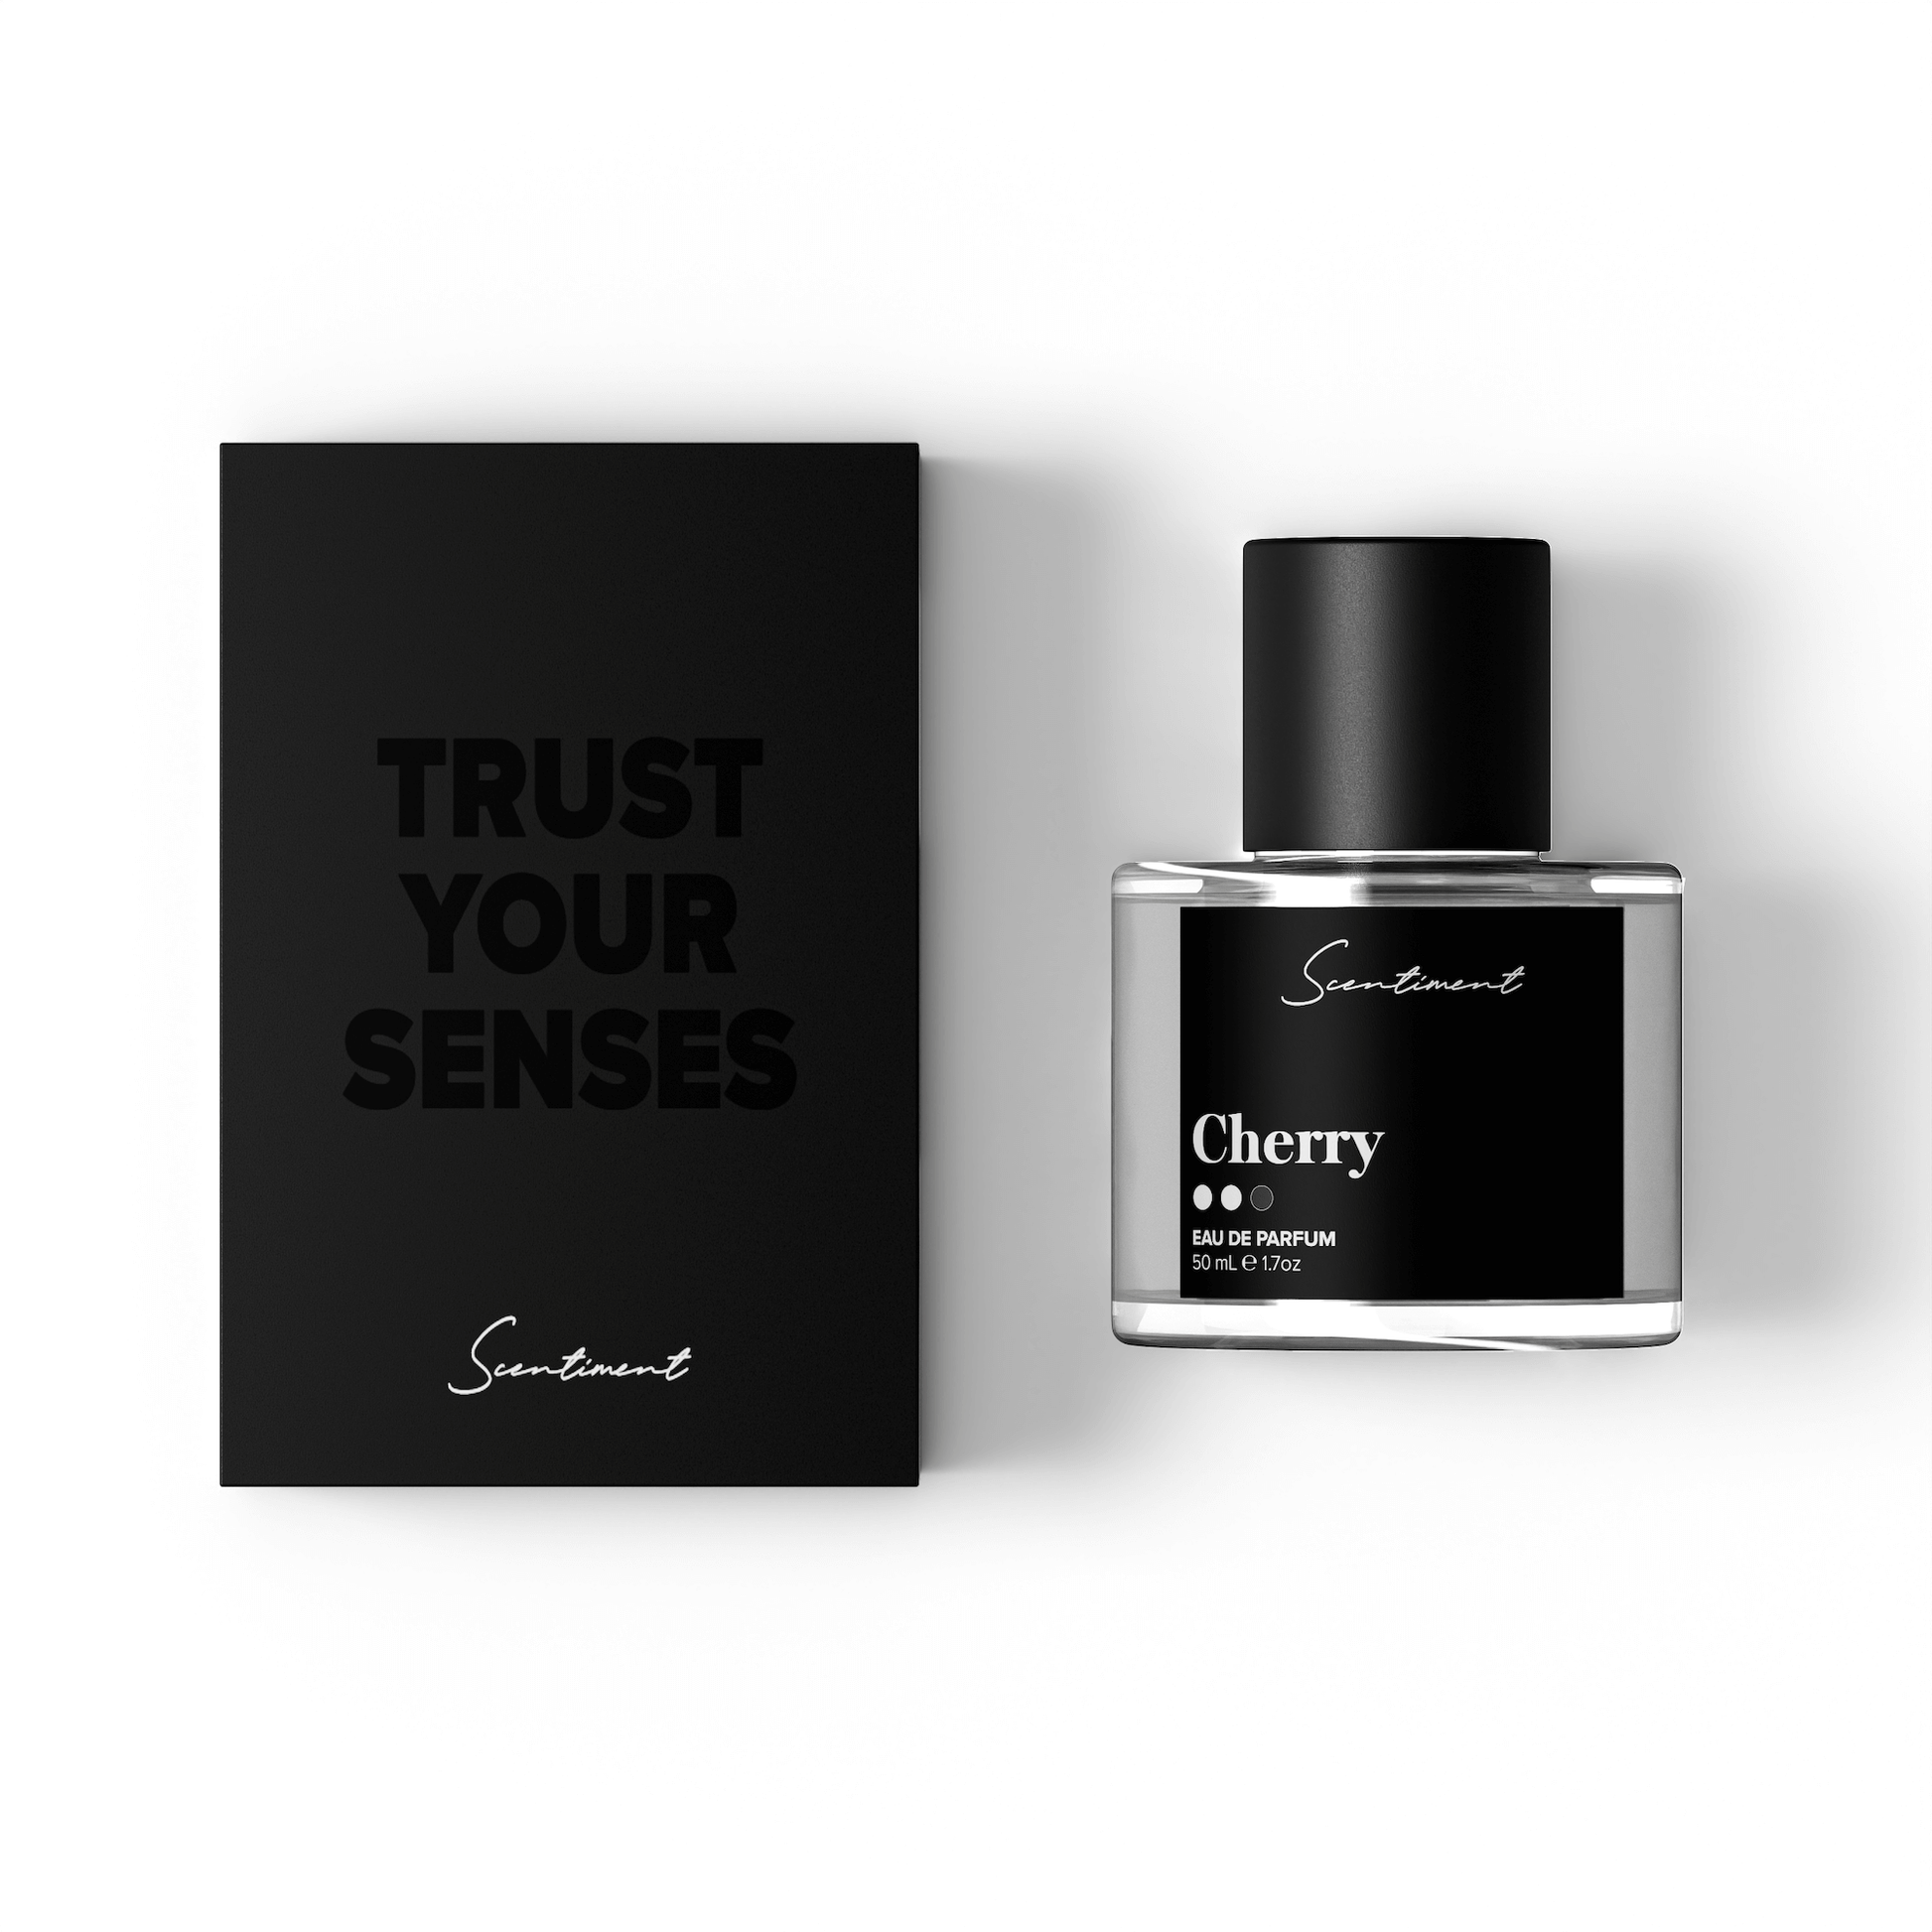 Cherry Body Fragrance and Packaging, inspired by Lost Cherry®